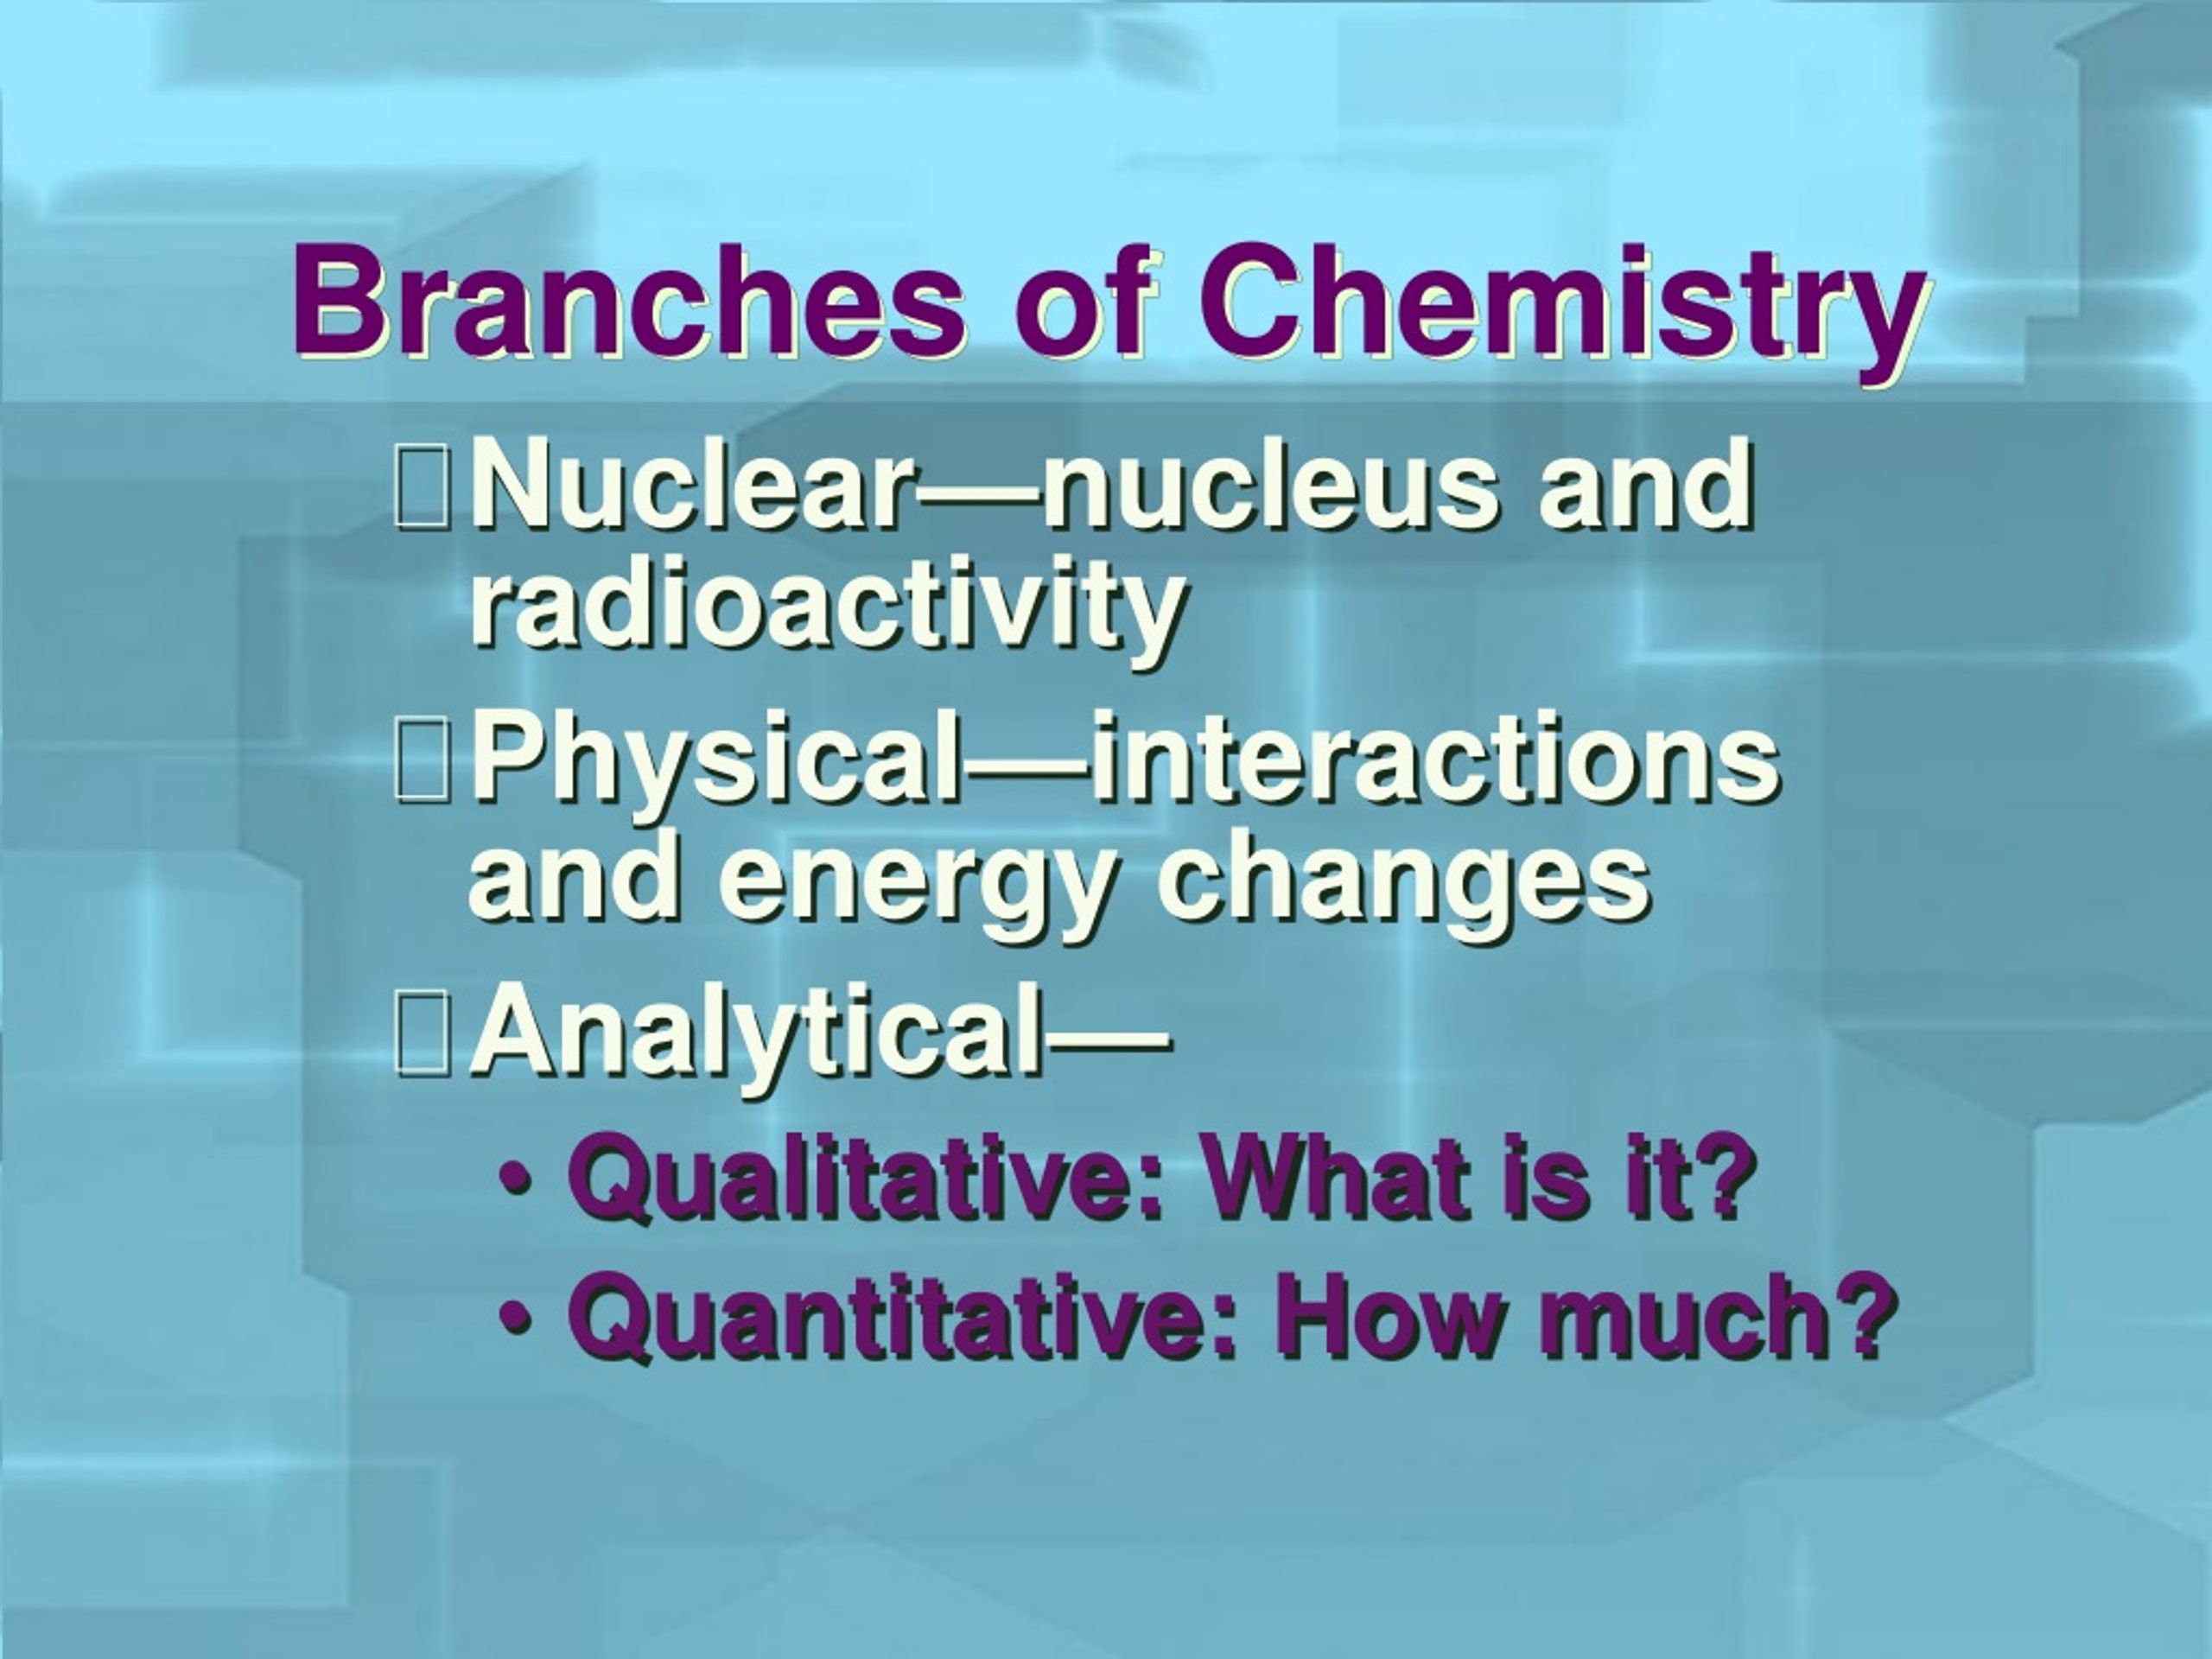 PPT - Why Study Chemistry? PowerPoint Presentation, free download - ID ...